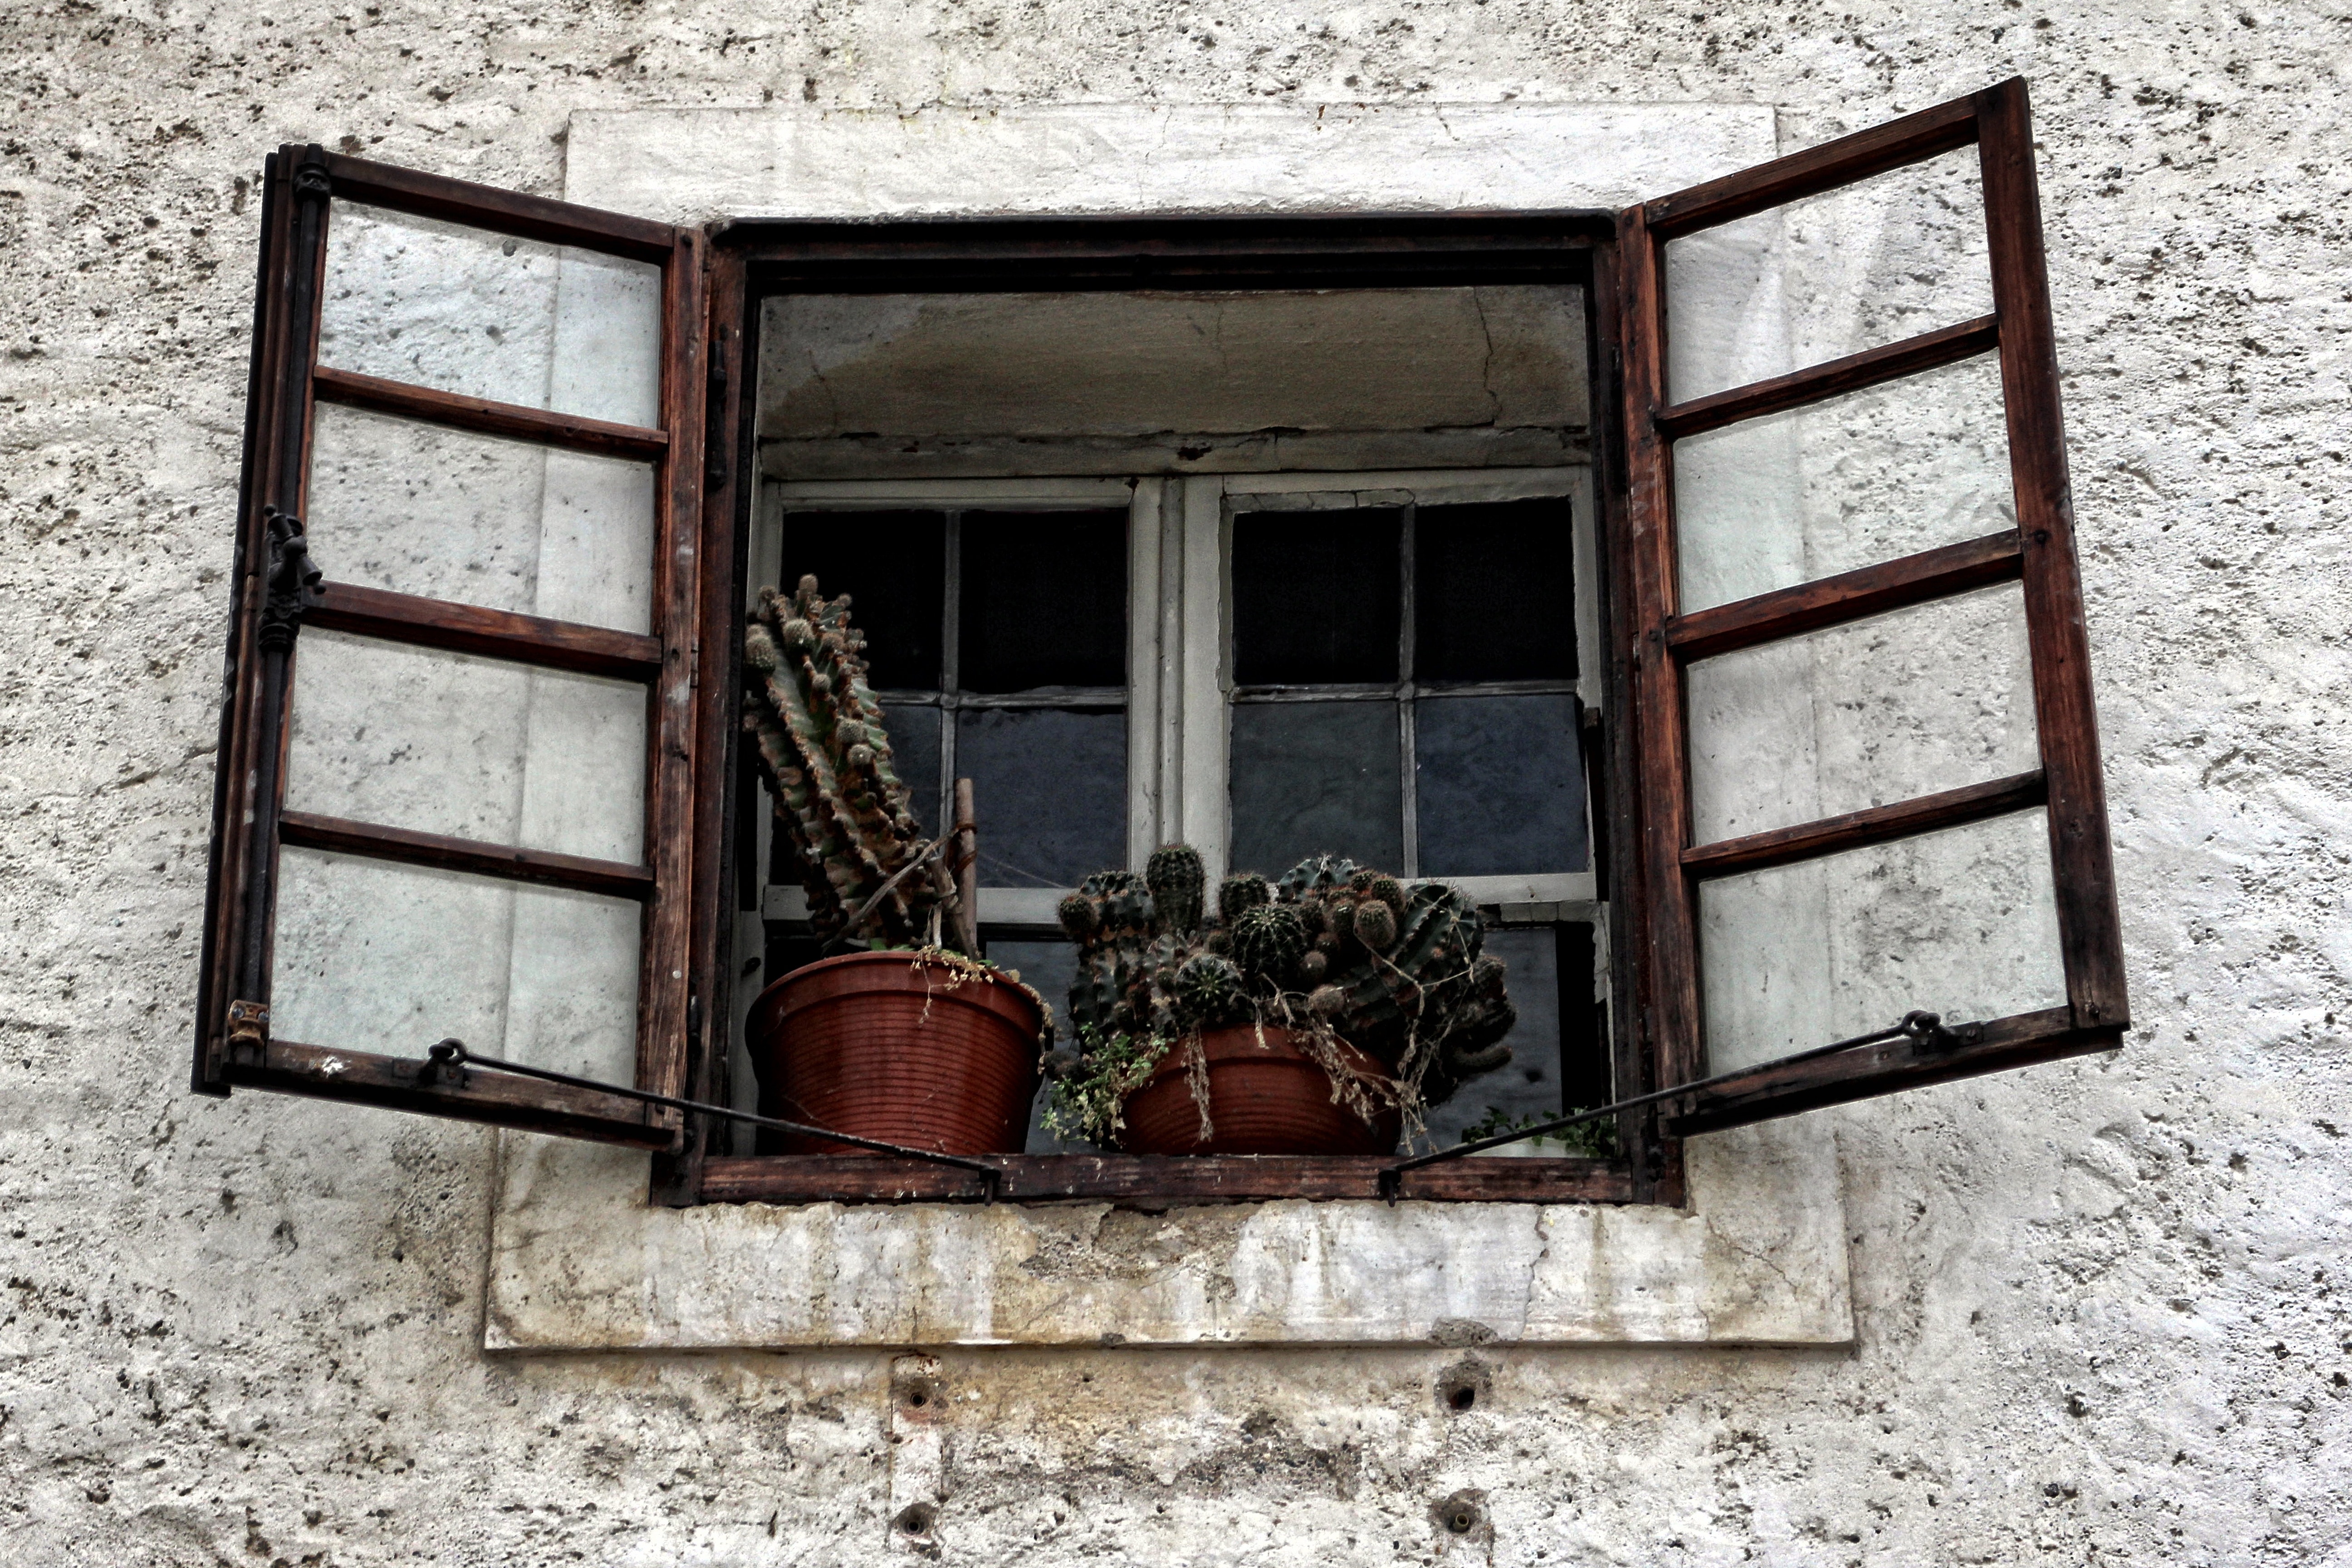 cacti and brown wooden framed window